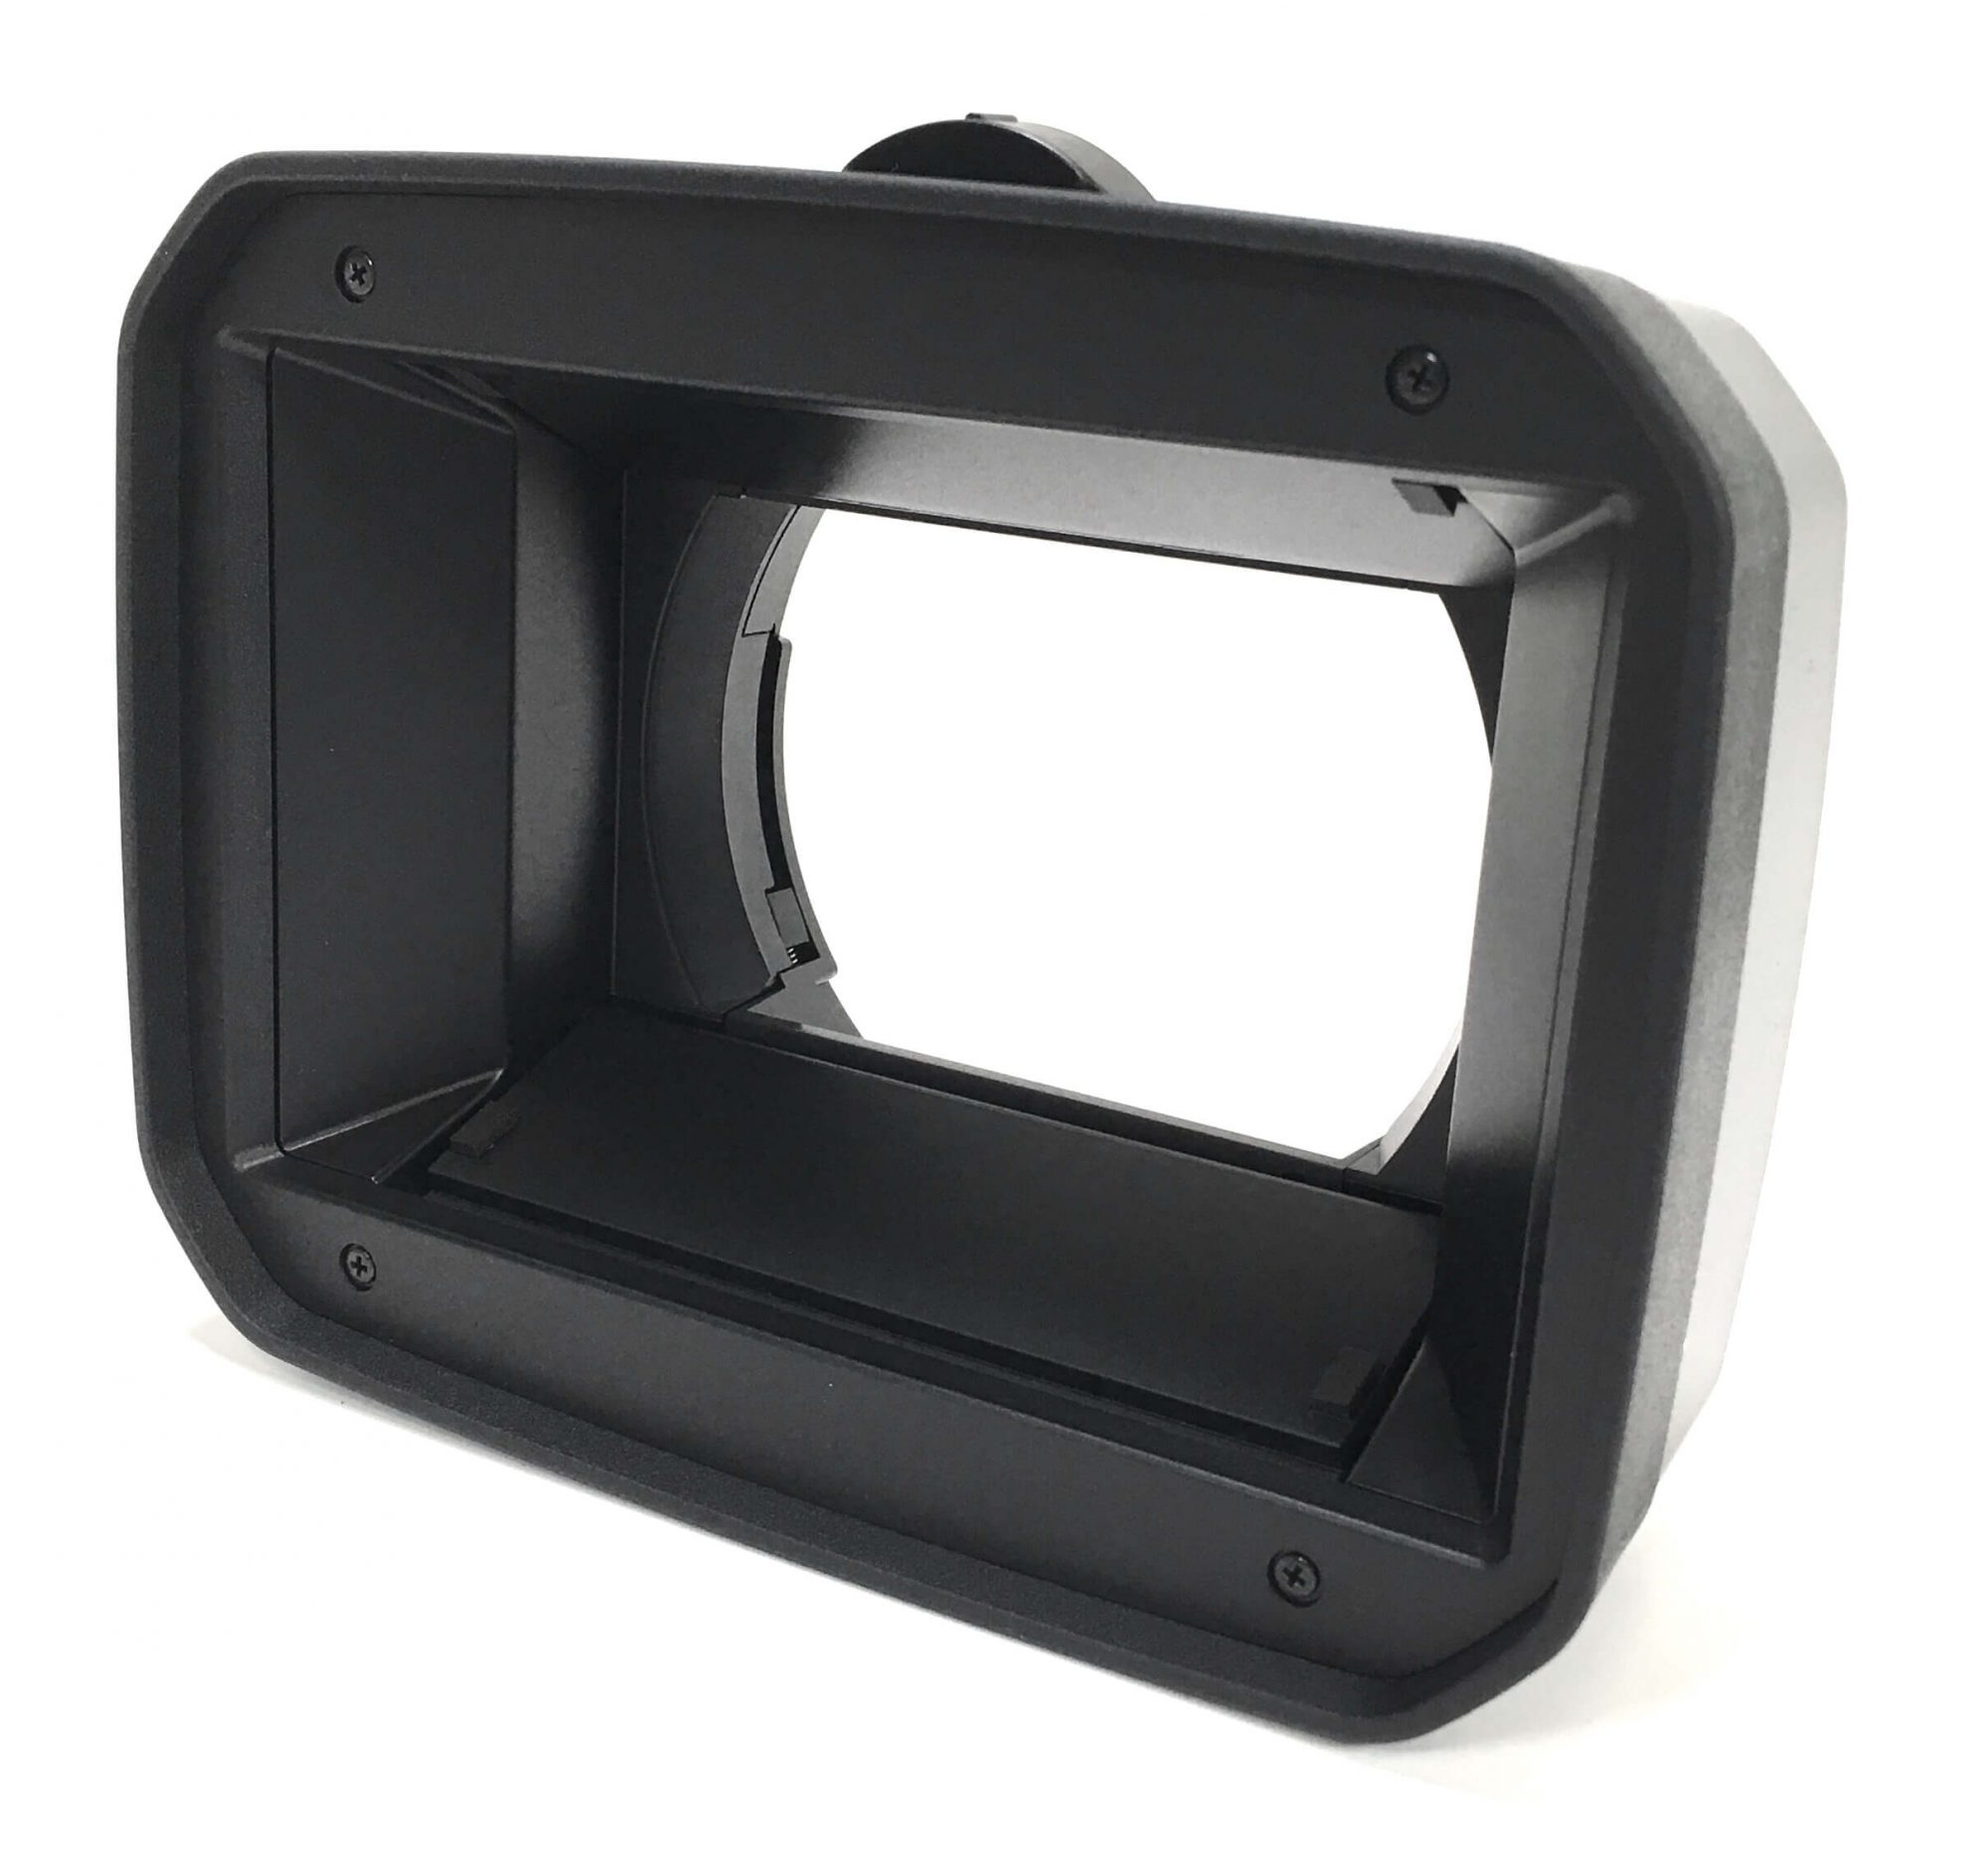 Original Lens Hood with Shutter for the Sony HXR-NX3 camcorder. It is a genuine Sony part, sourced directly from Sony USA. Brand new factory fresh. Free Shipping.